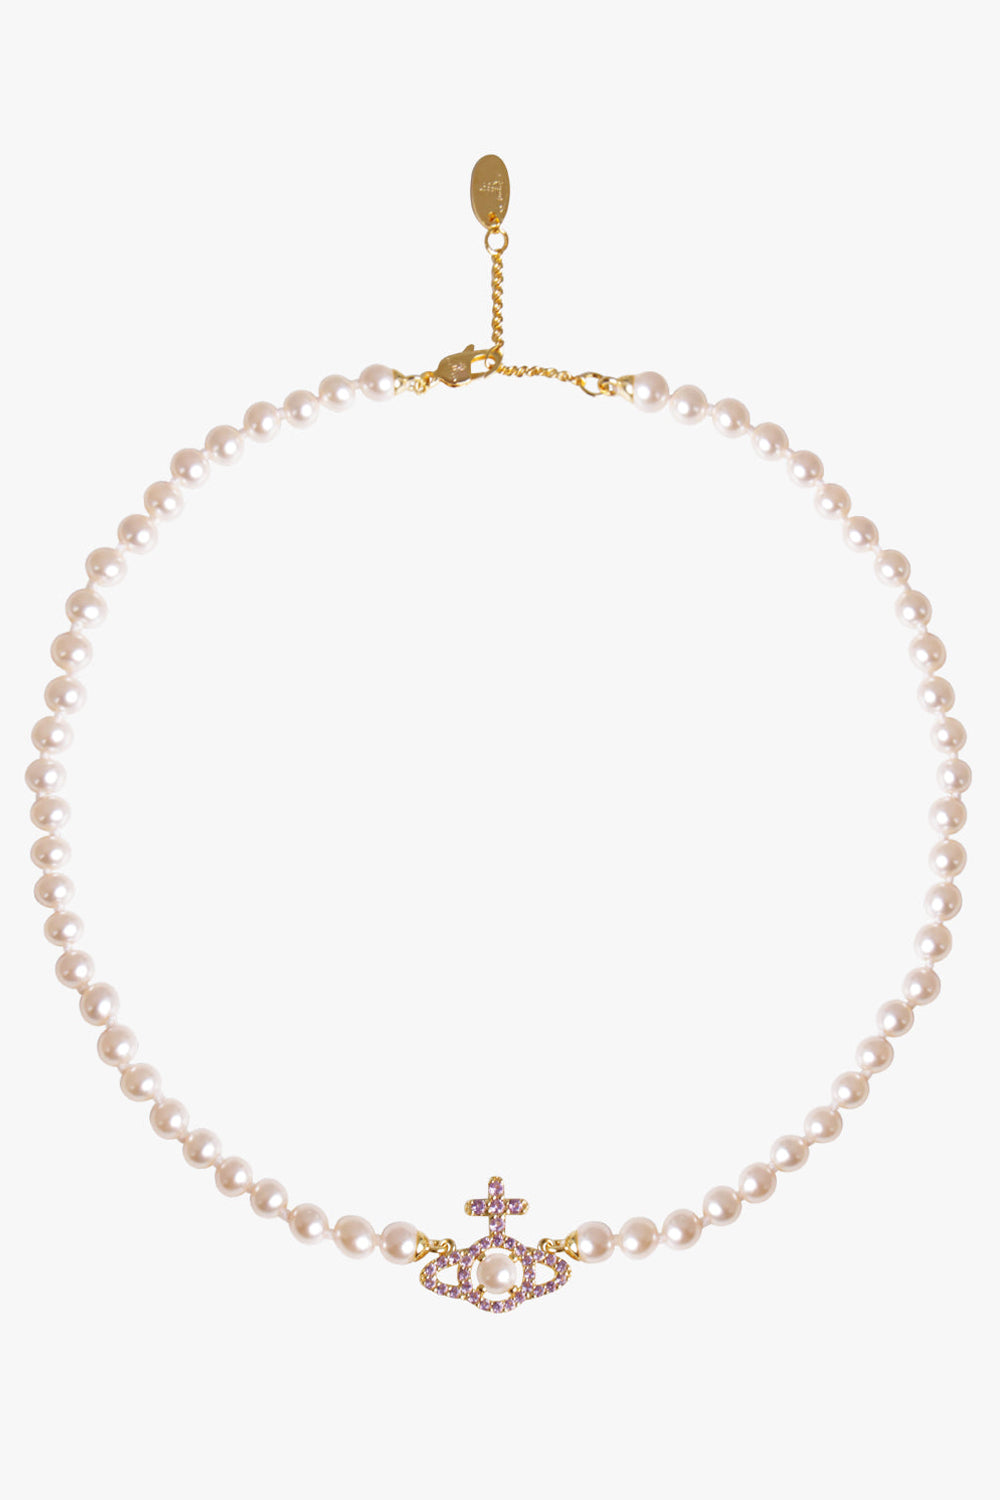 VIVIENNE WESTWOOD JEWELLERY Gold Olympia Pearl Necklace | Gold/Cream Rose Pearl